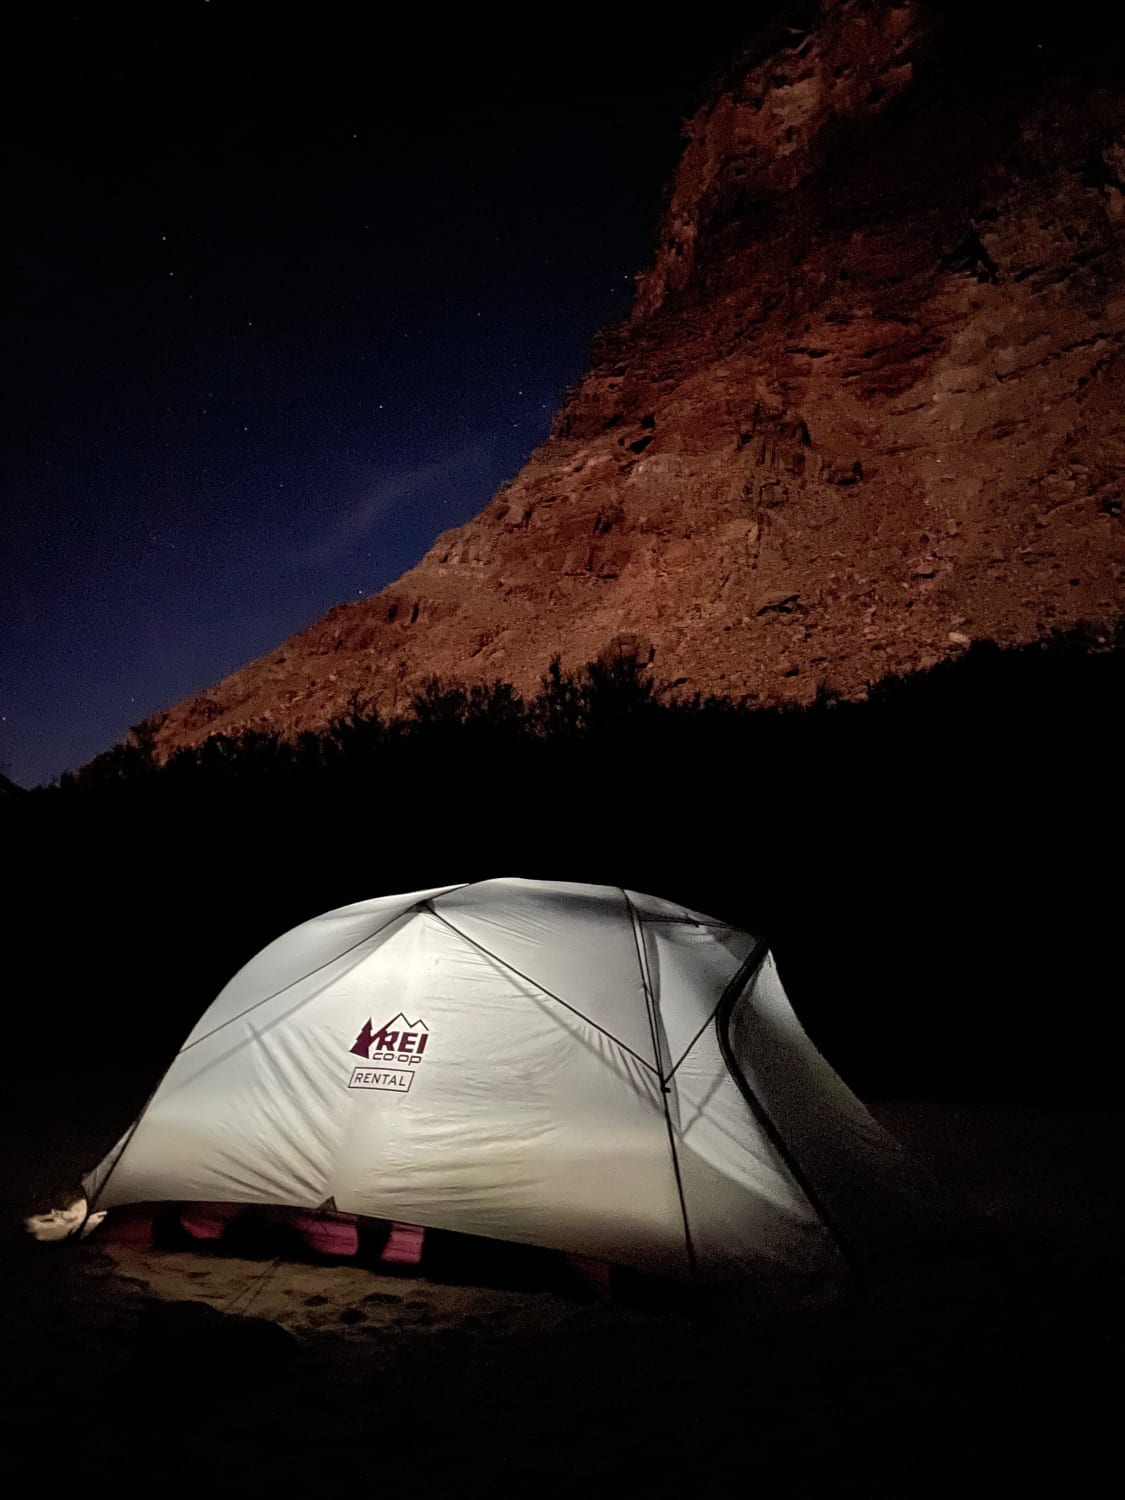 A bright night in the Canyonlands National Park backcountry(f/1.6, 0.5s)